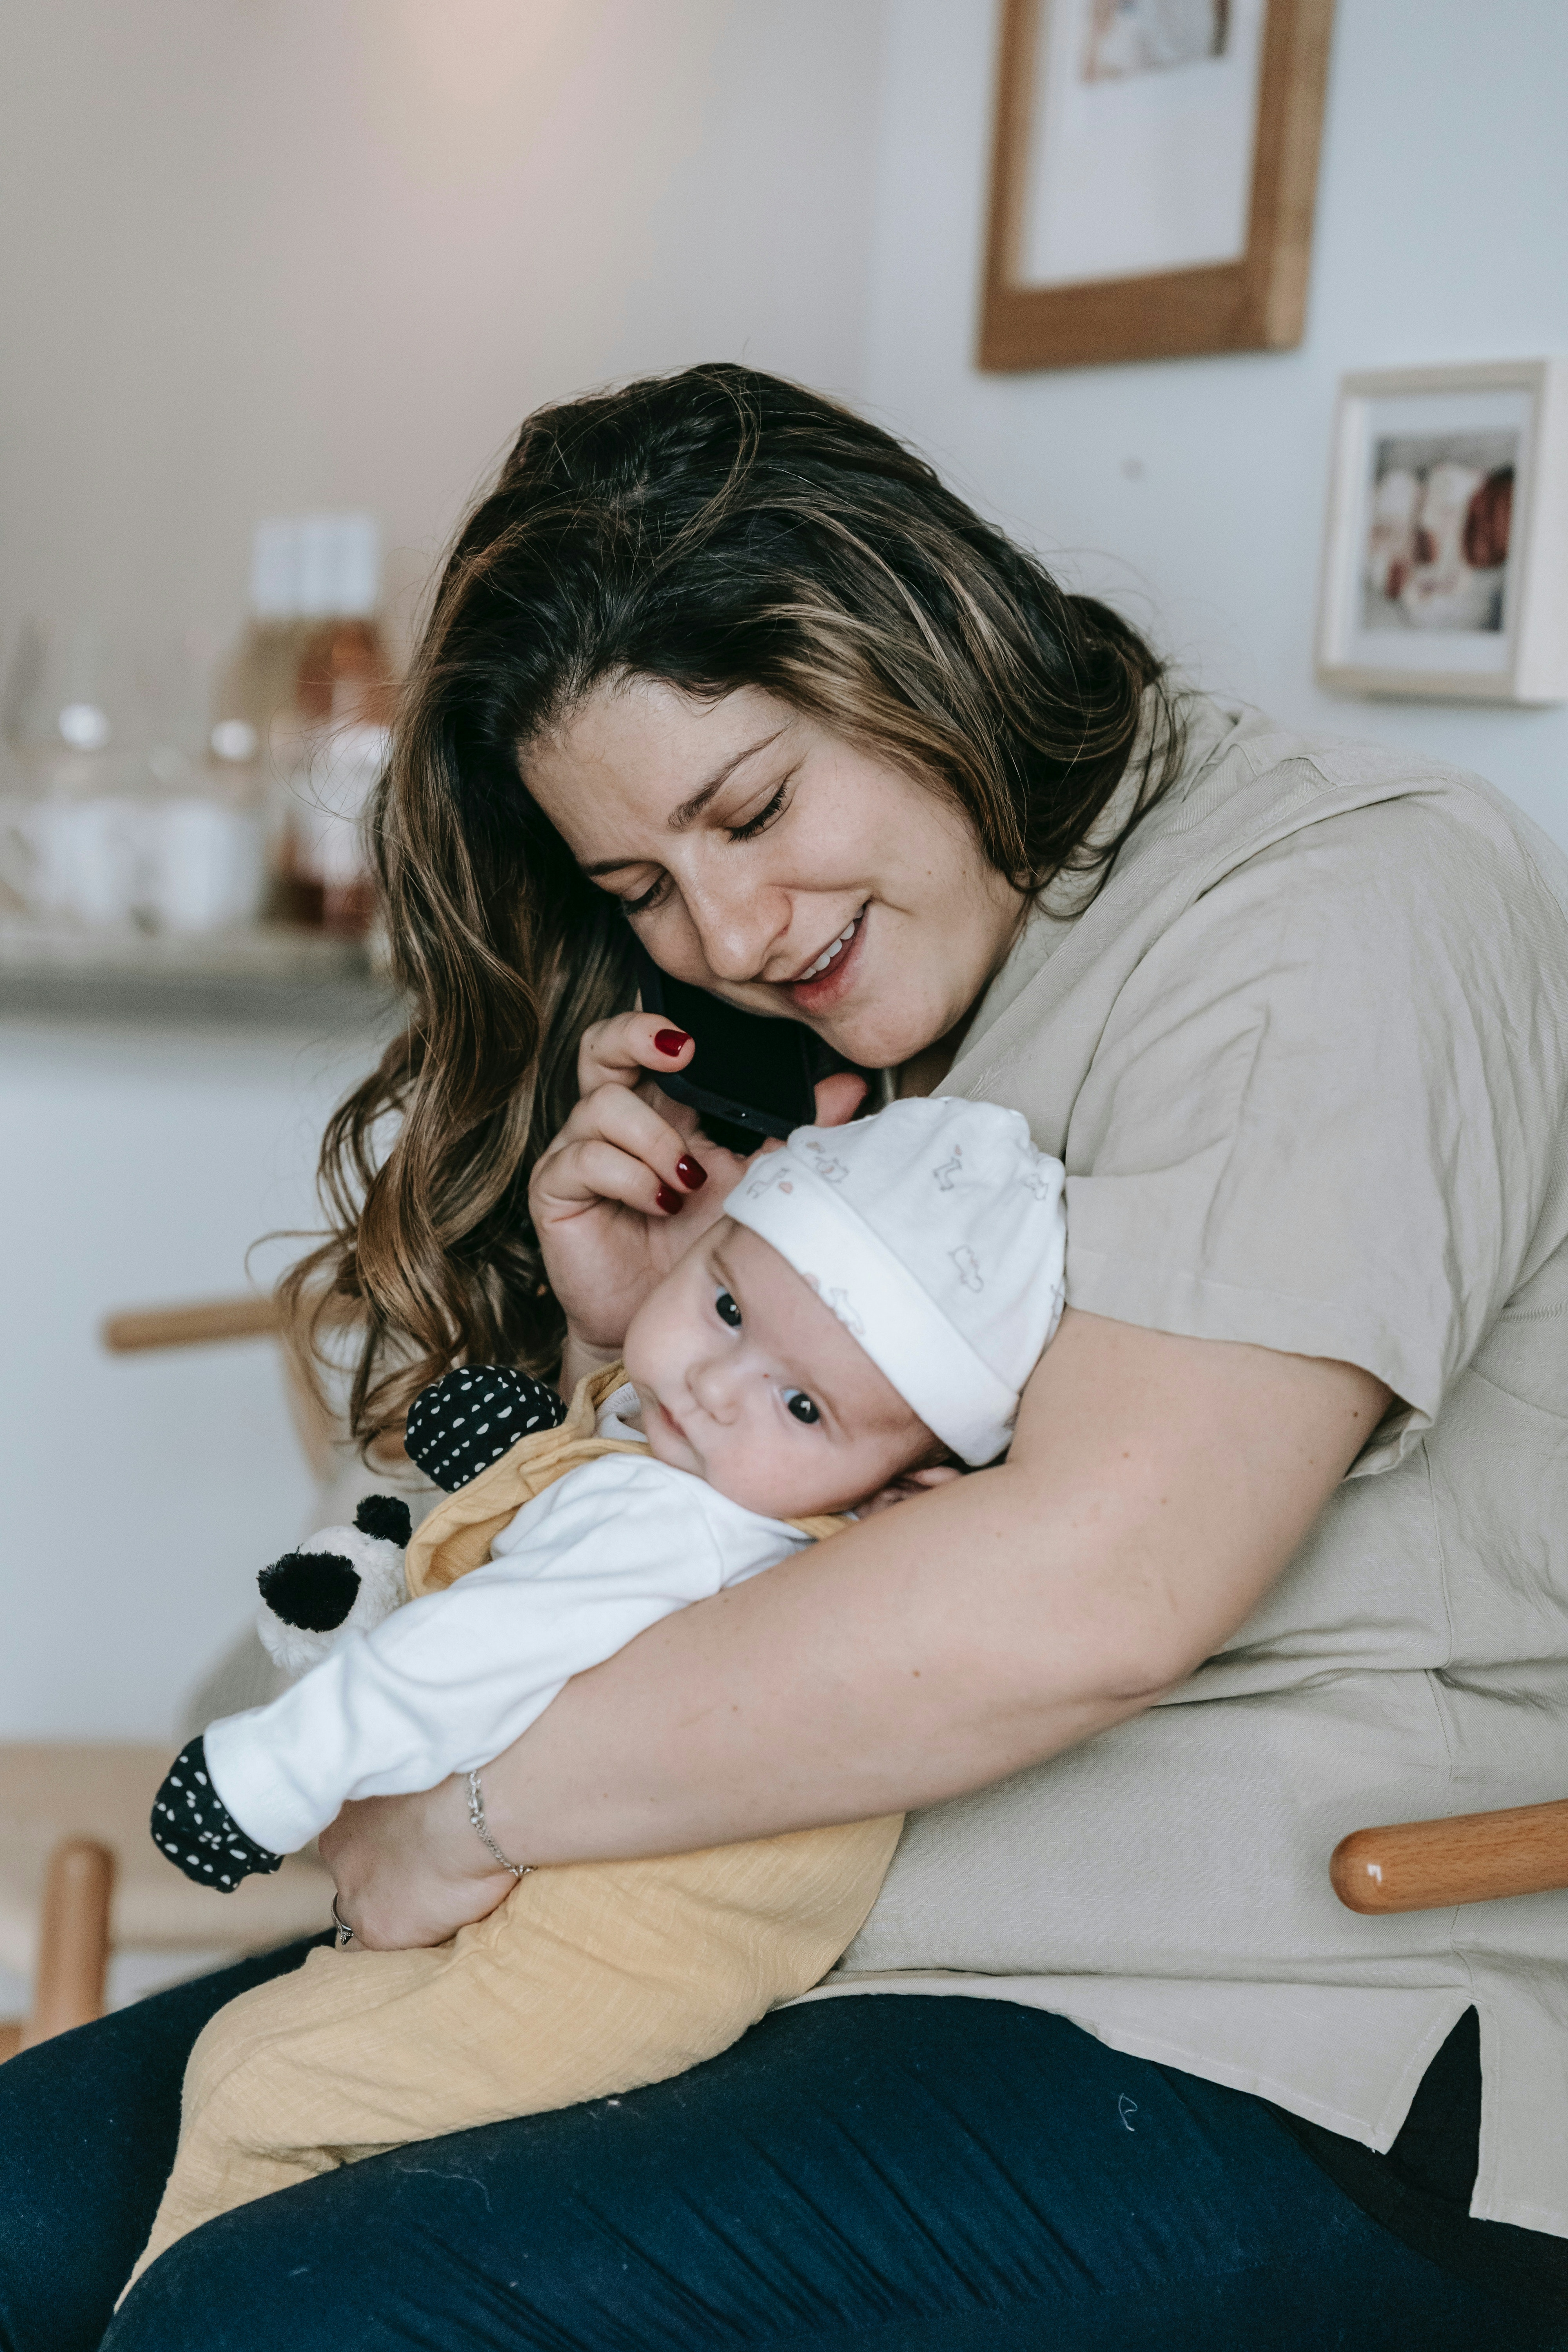 find your perfect therapist for any postpartum issues